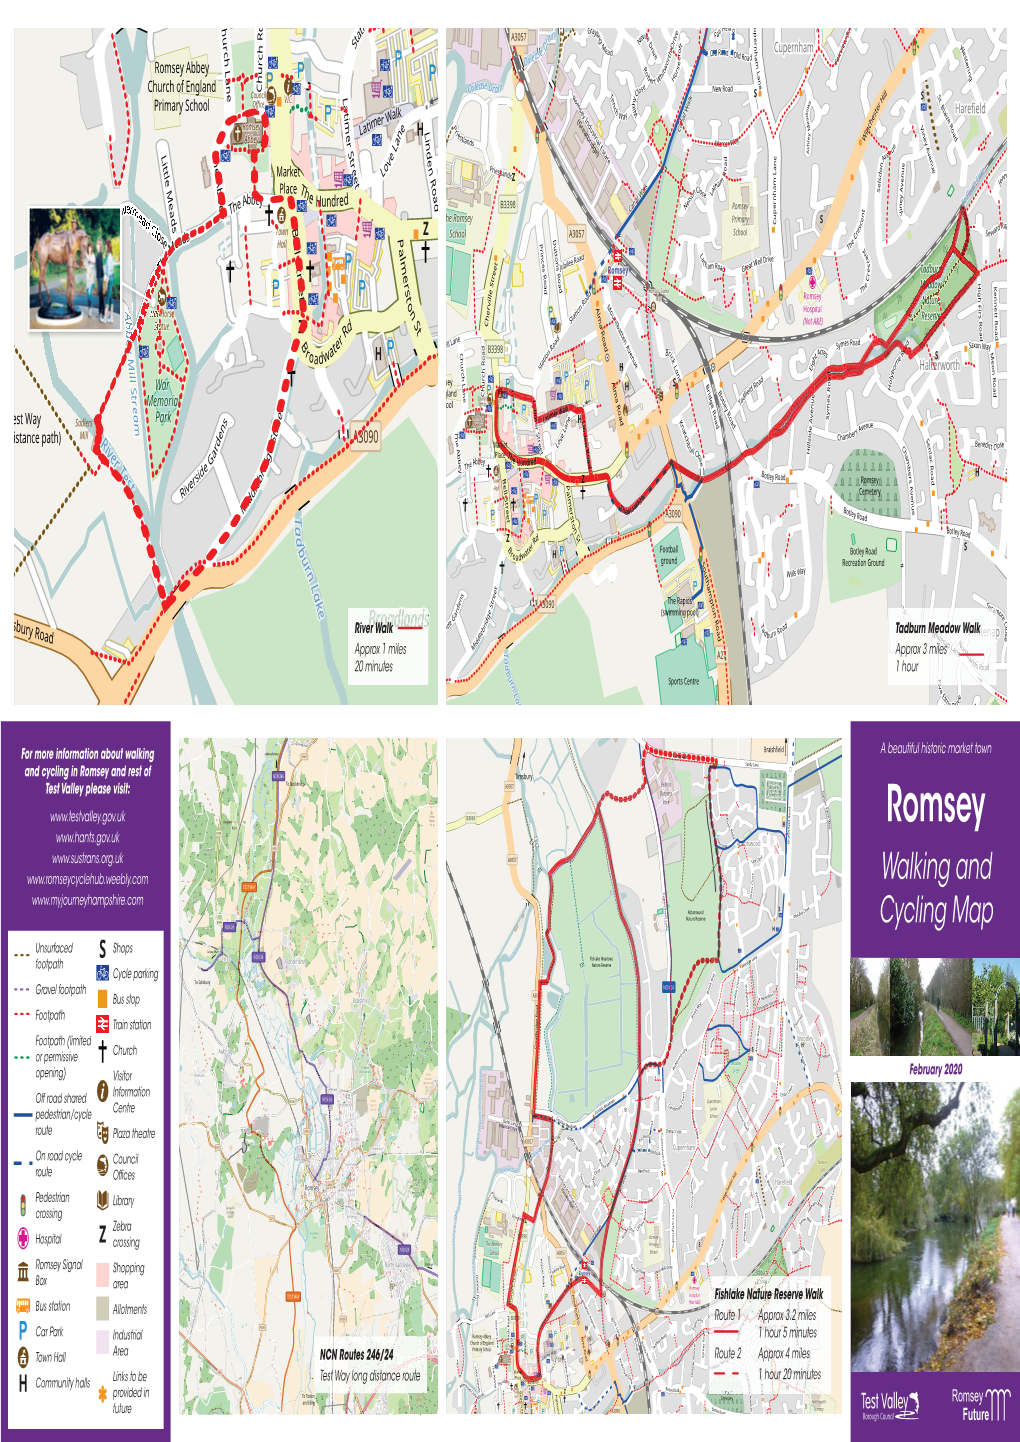 Romsey Walking and Cycling Map